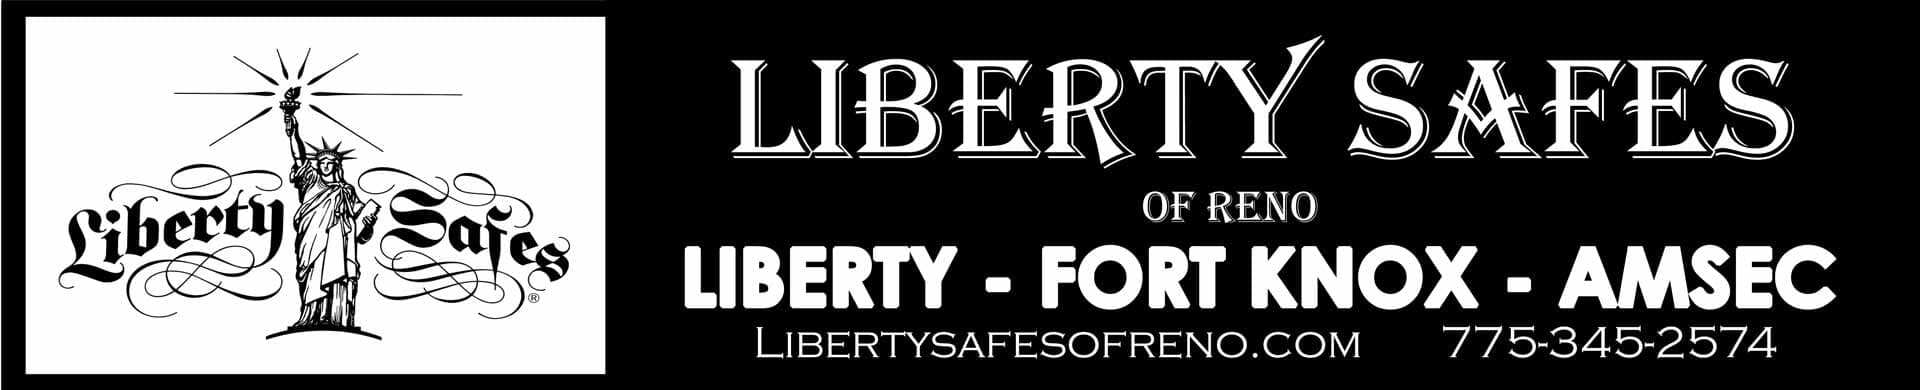 liberty safes of reno front  sign